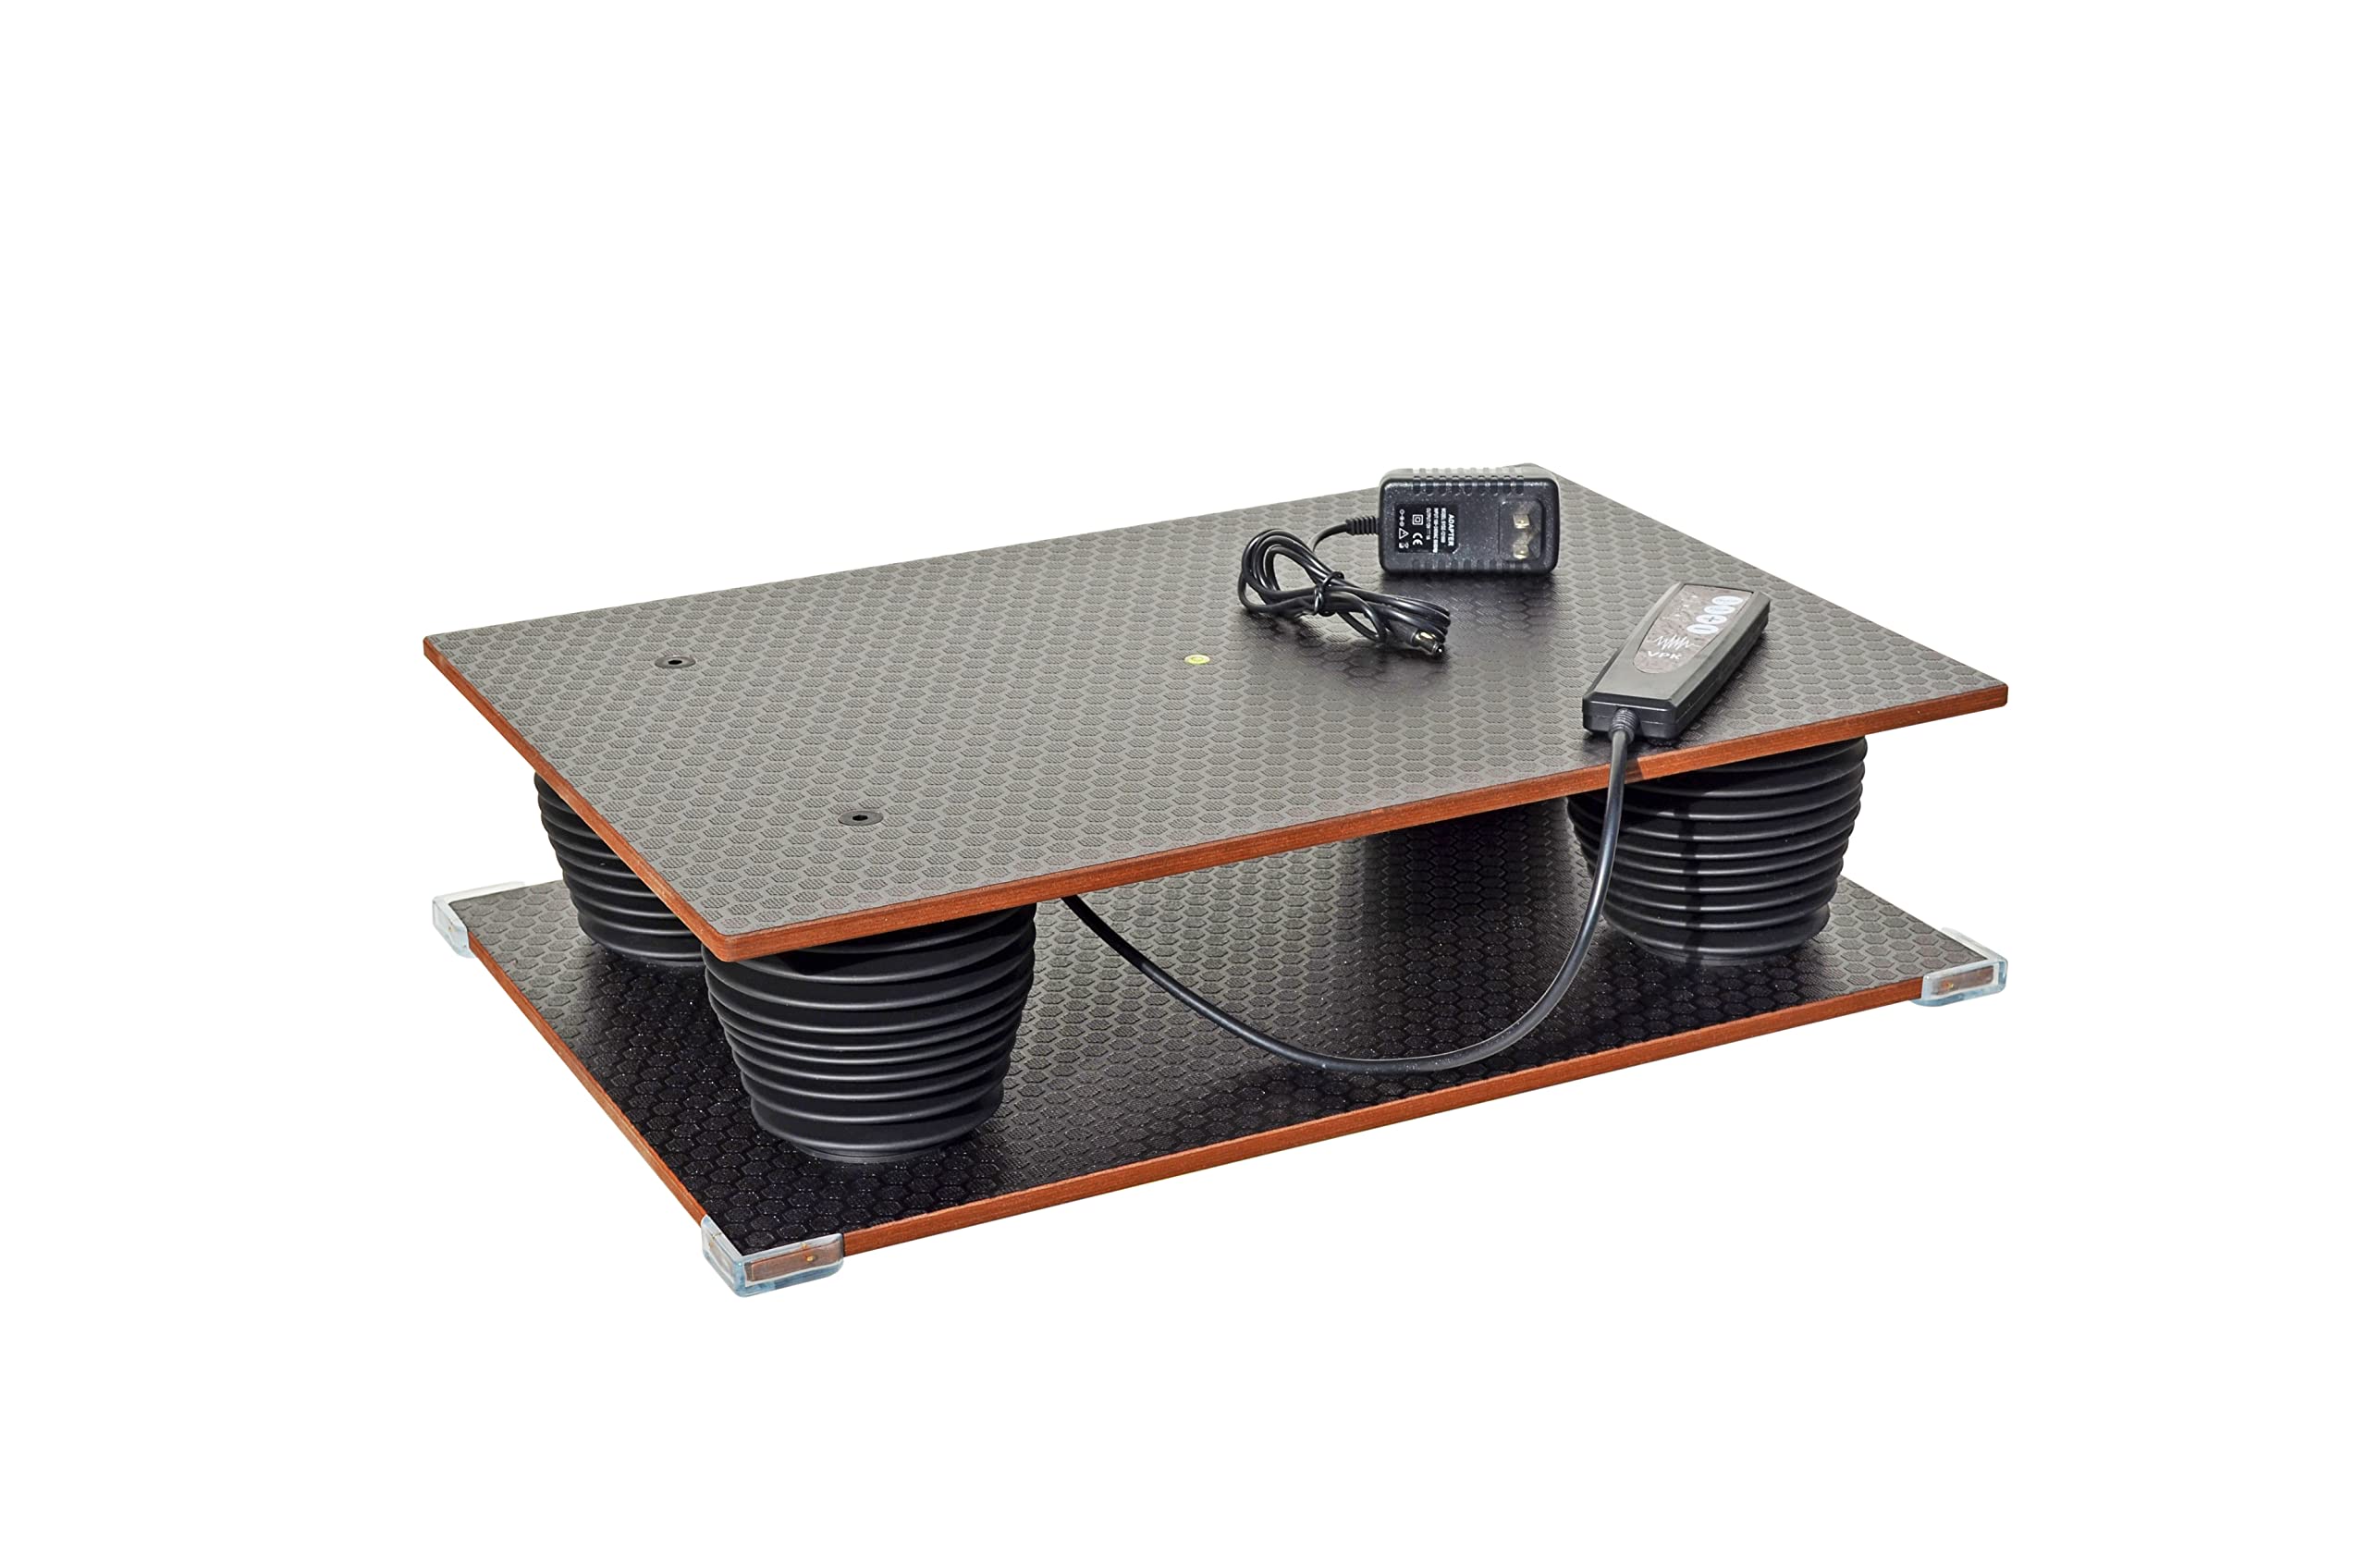 Vibrating Table/Concrete Vibrator Bubble Free Machine for Chocolate Confectionery and Other MOLDING